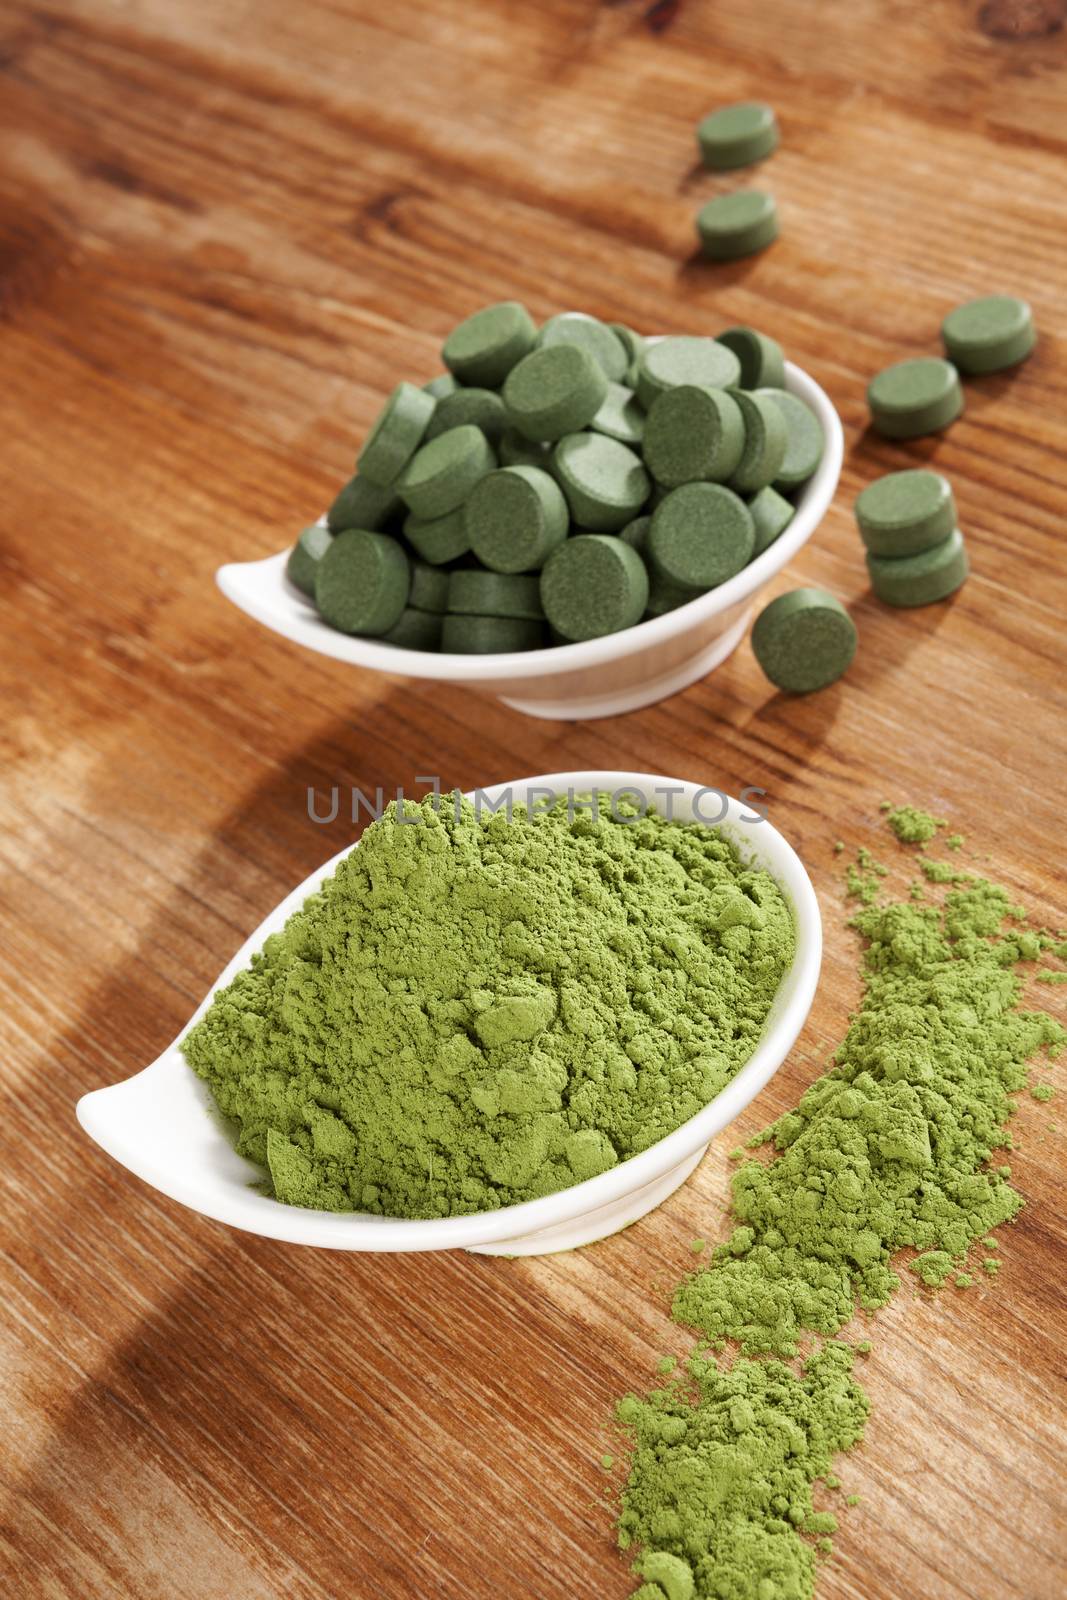 Chlorella pills and wheat grass powder in bowl on brown wooden background. Natural alternative medicine, weight loss and detox.